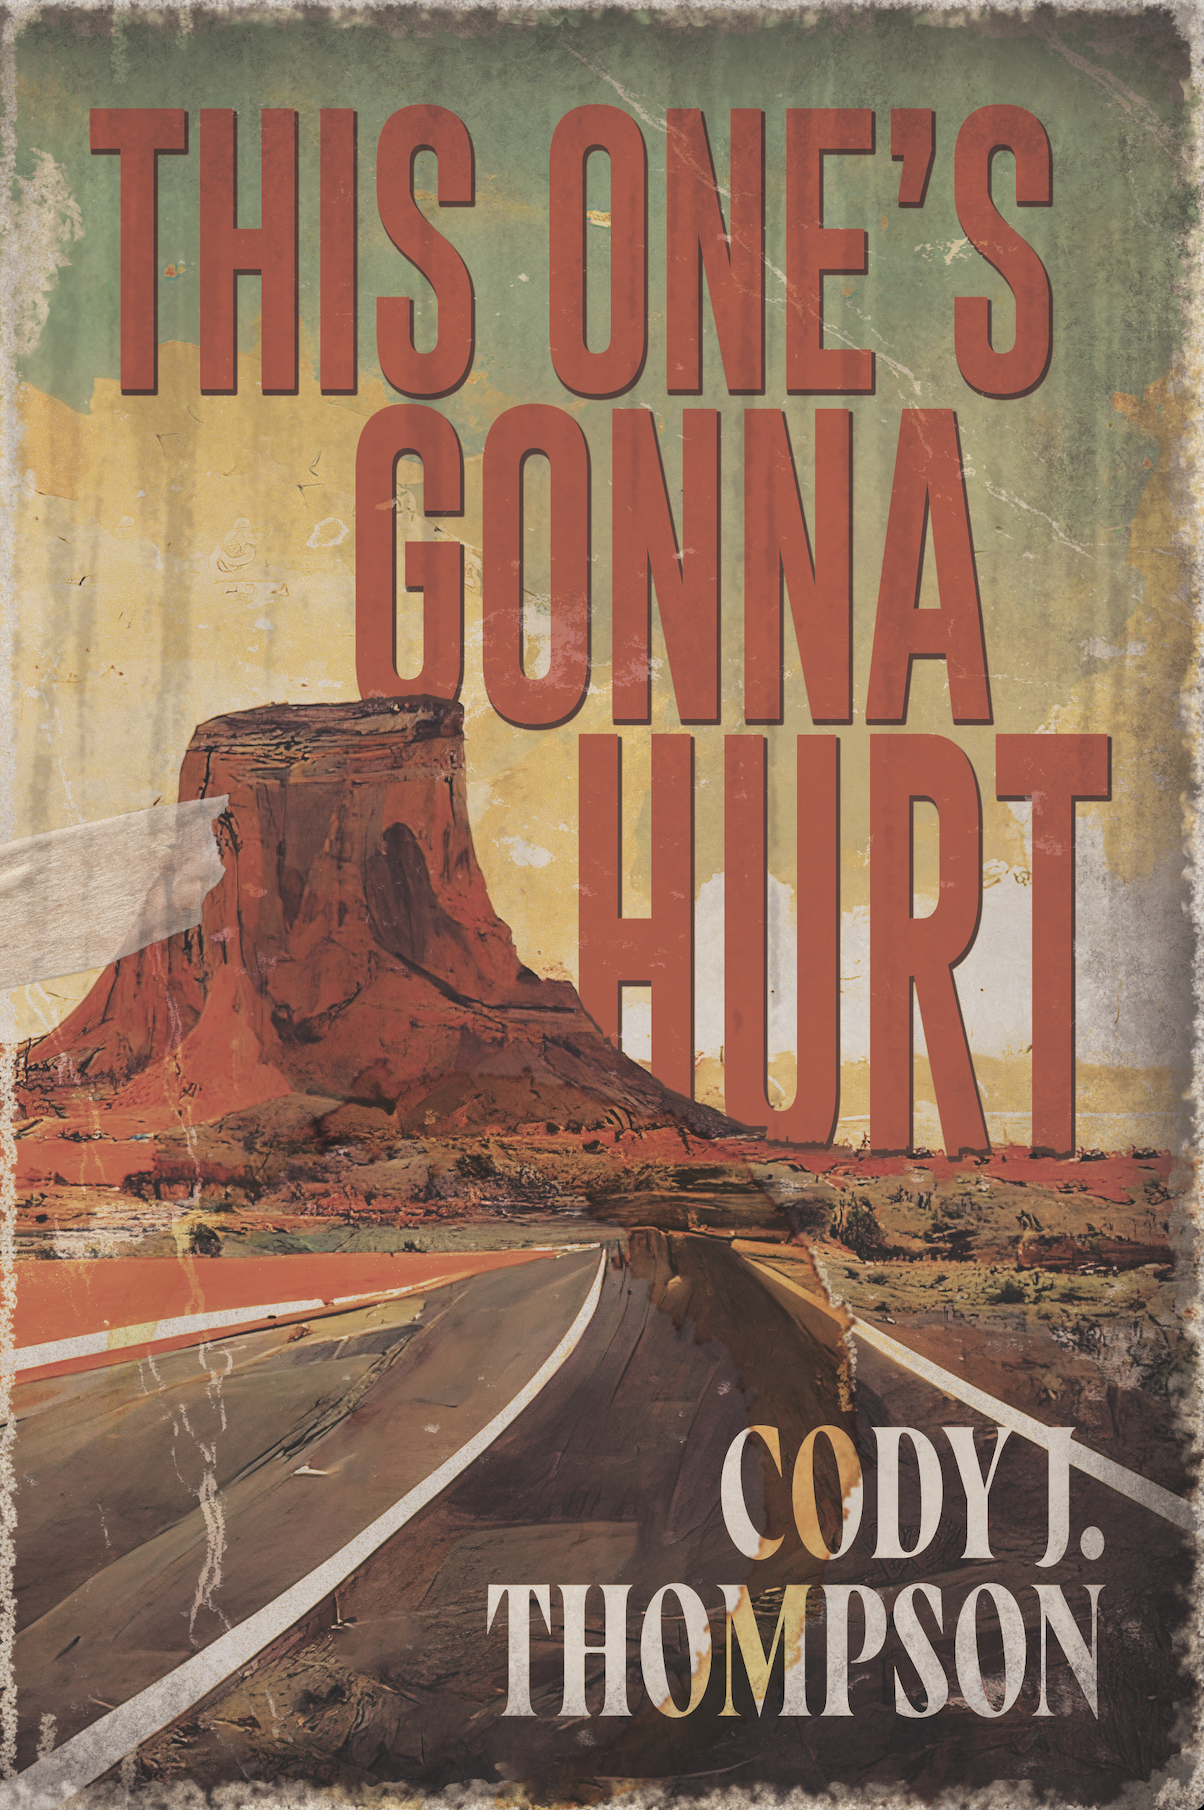 
					Cover art from "This One’s Gonna Hurt" by Cody J. Thompson